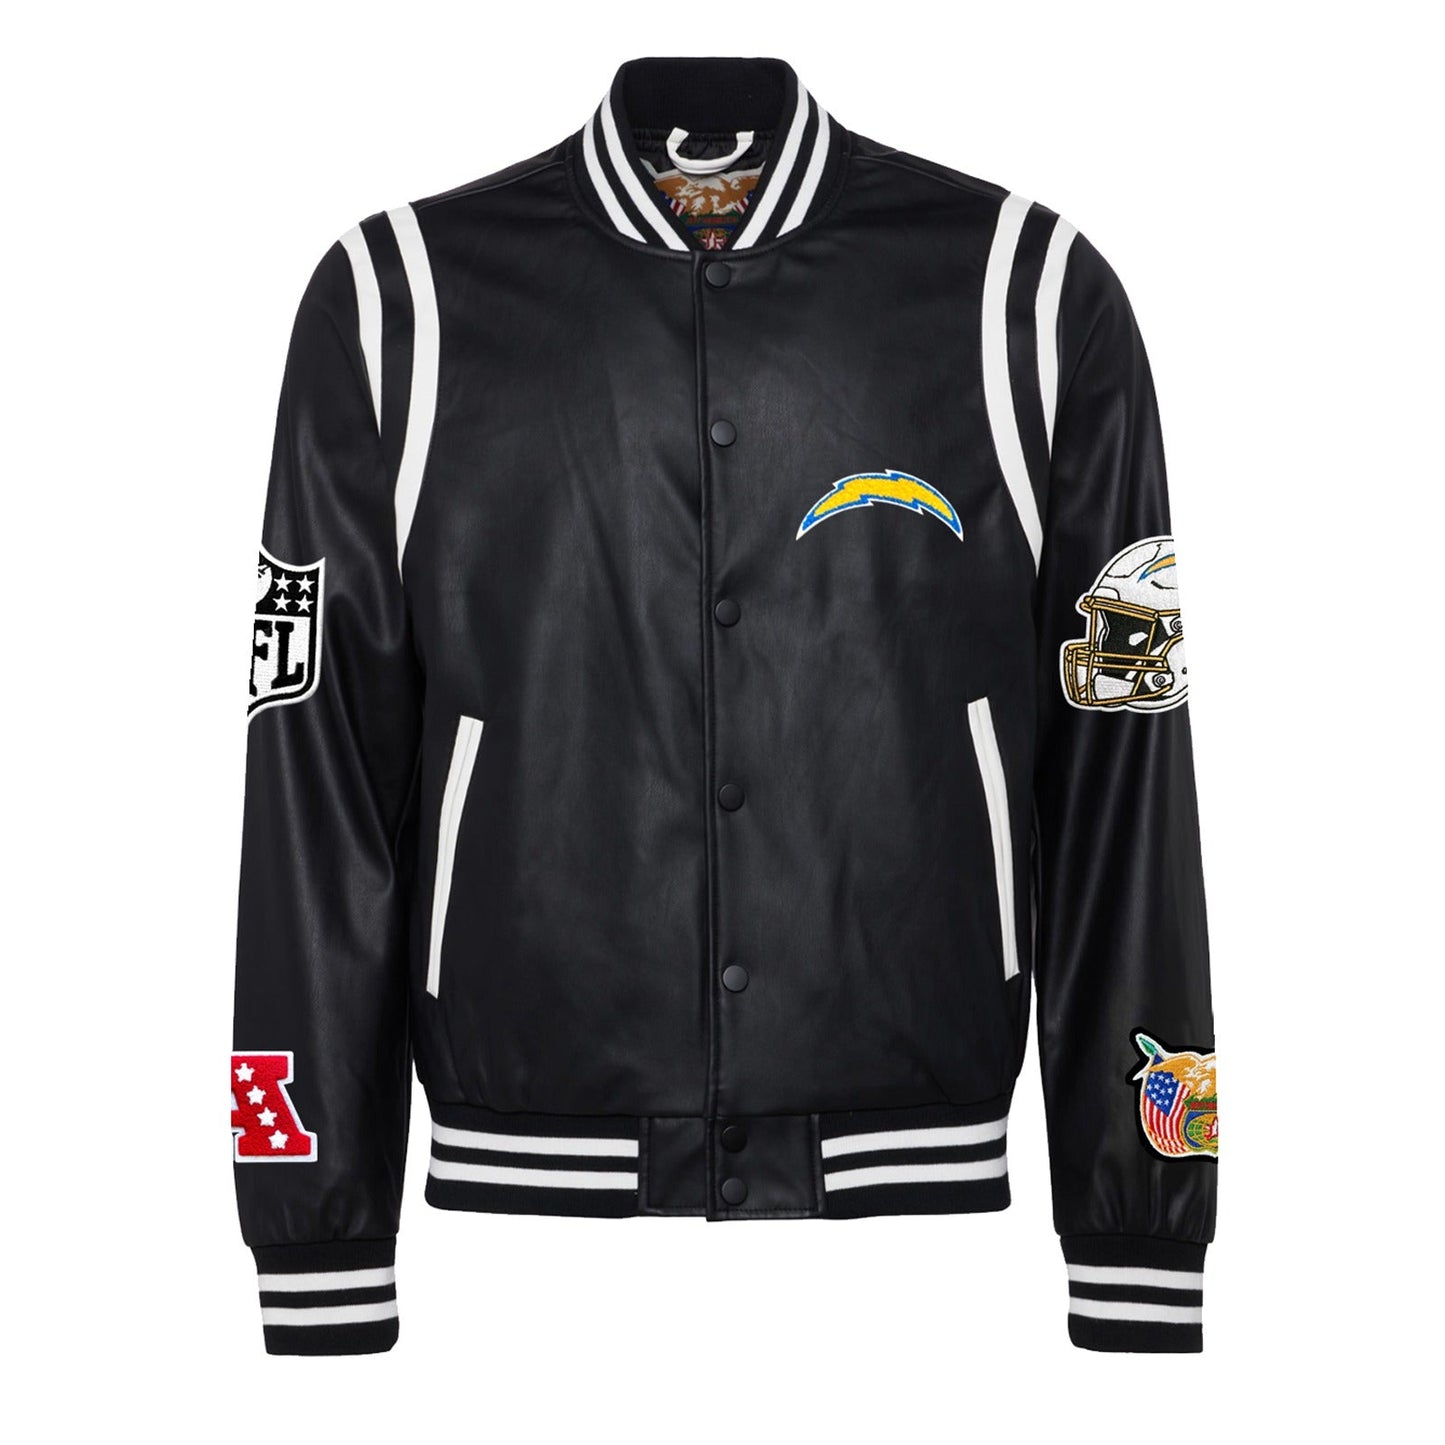 LOS ANGELES CHARGERS VEGAN LEATHER JACKET Black / White